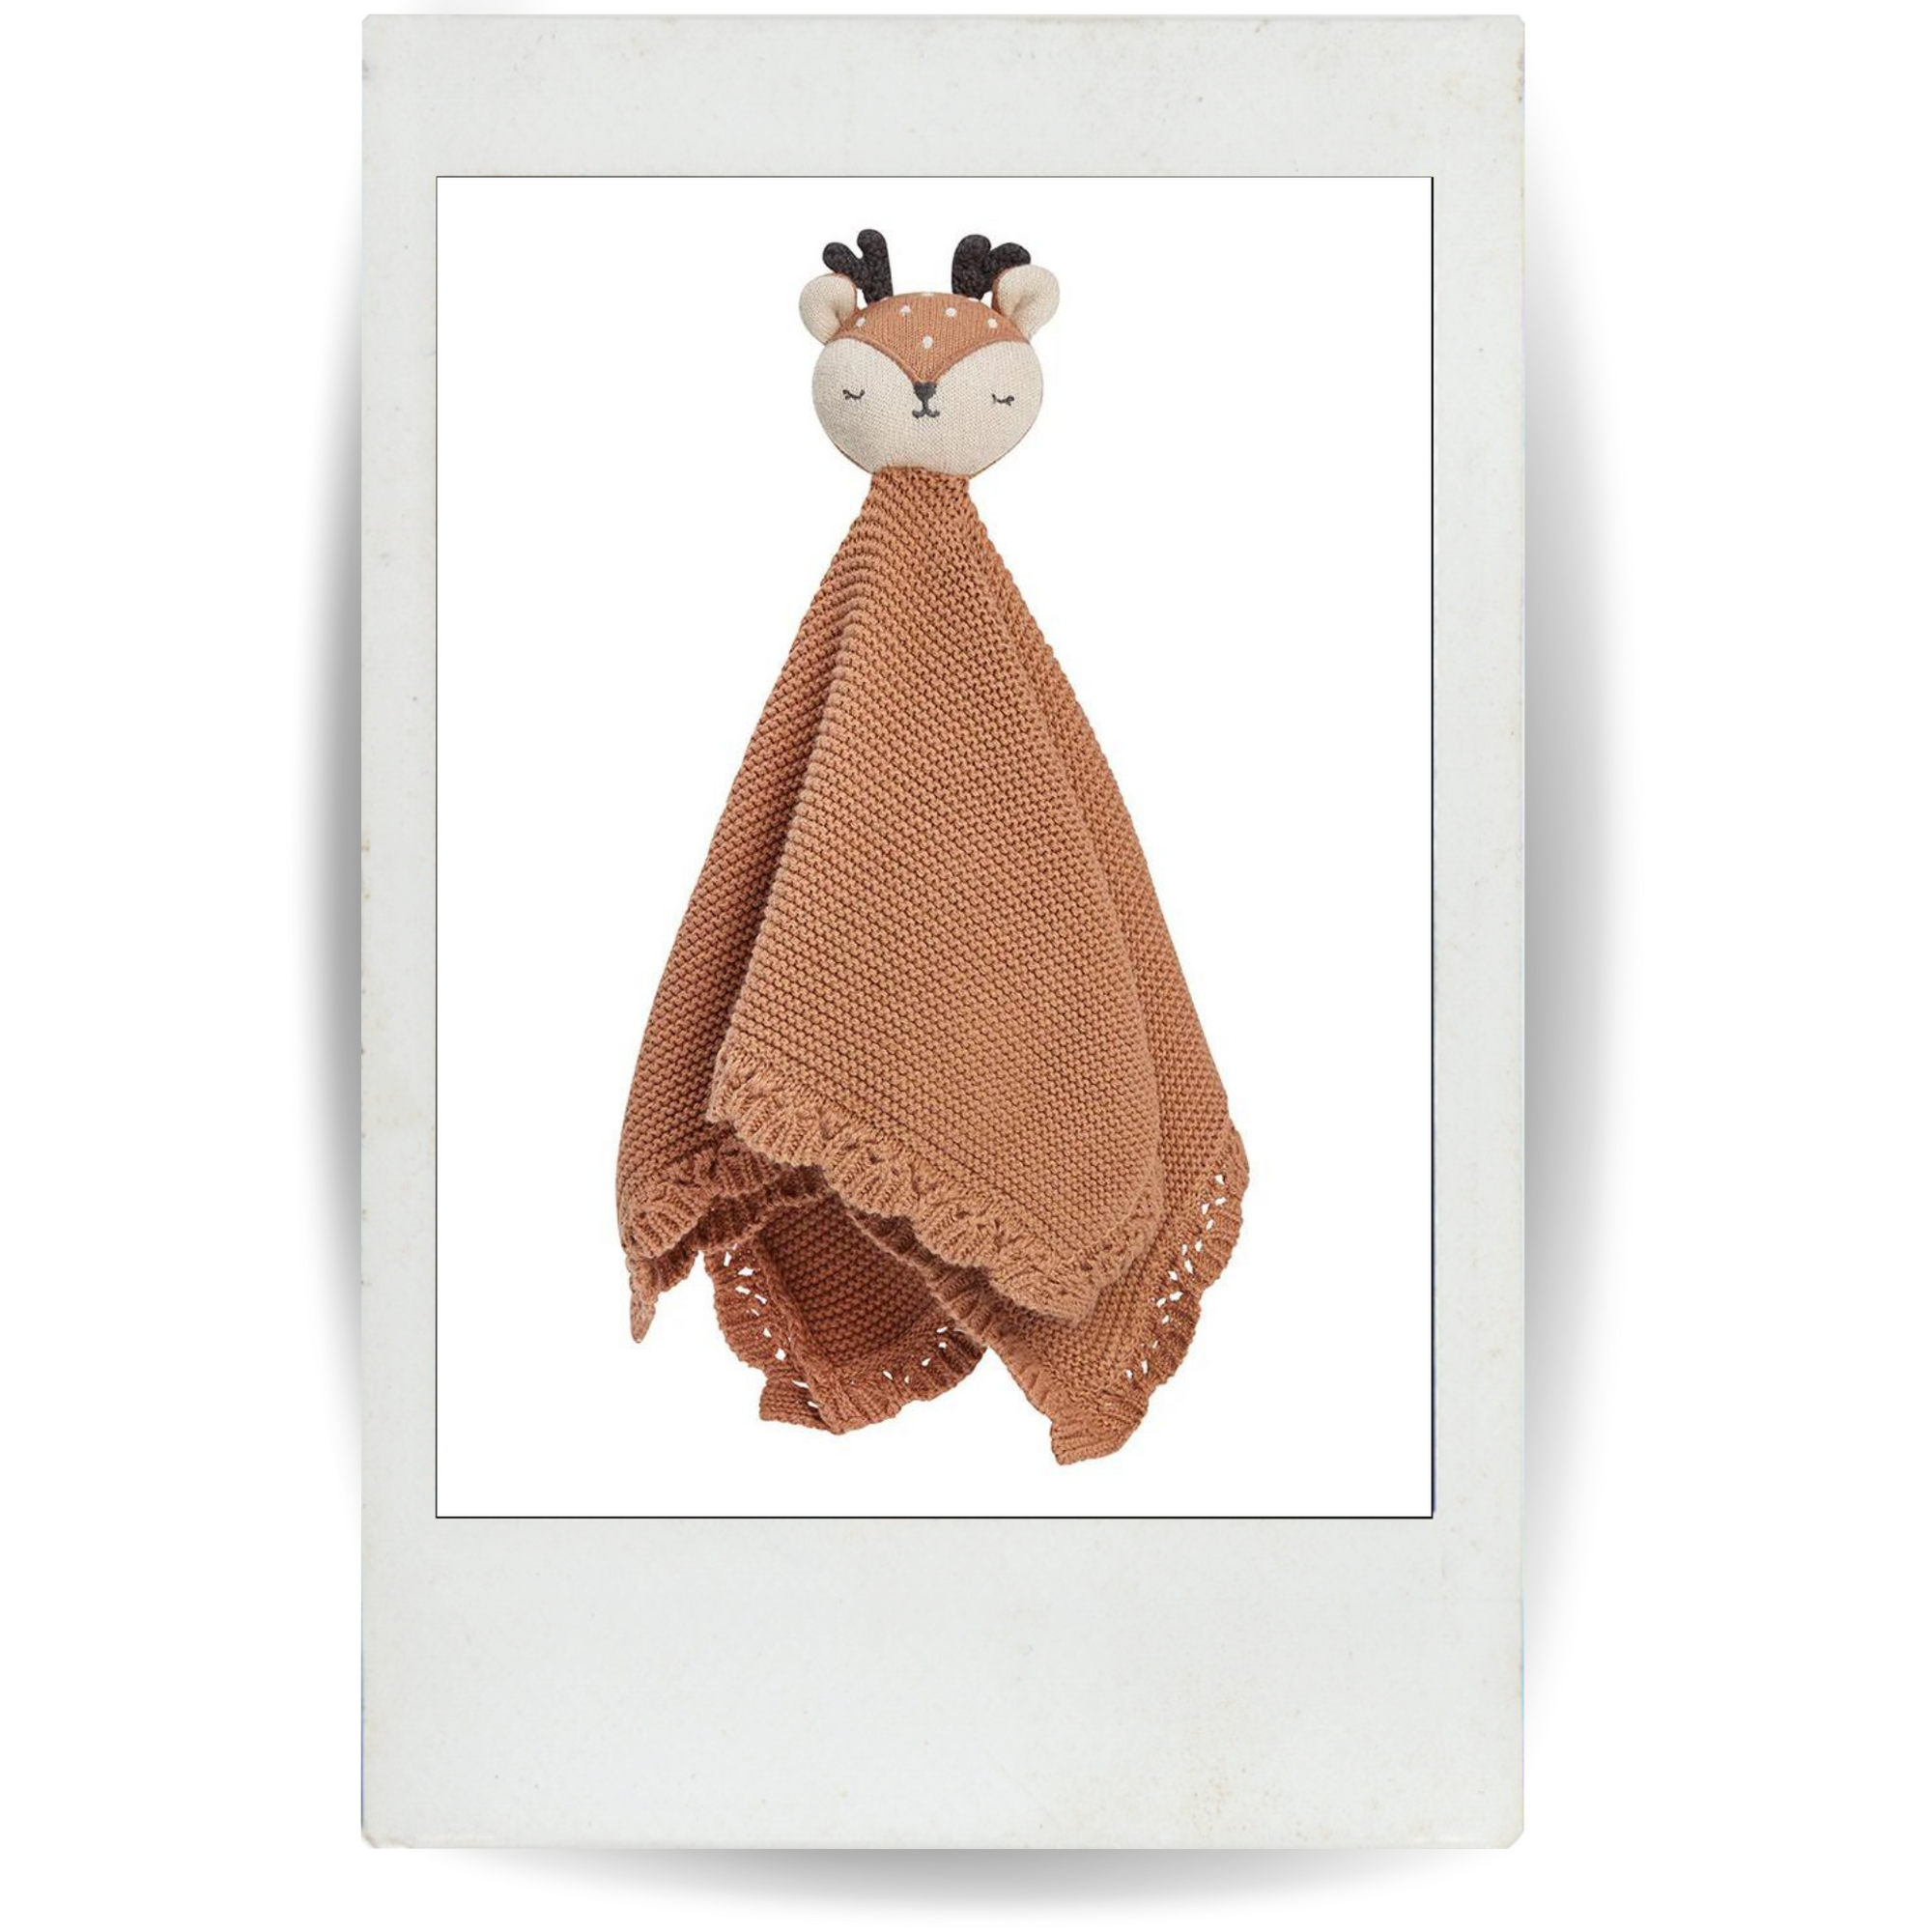 Tender Deer Doudou: Safety and Sweet Dreams for Your Baby